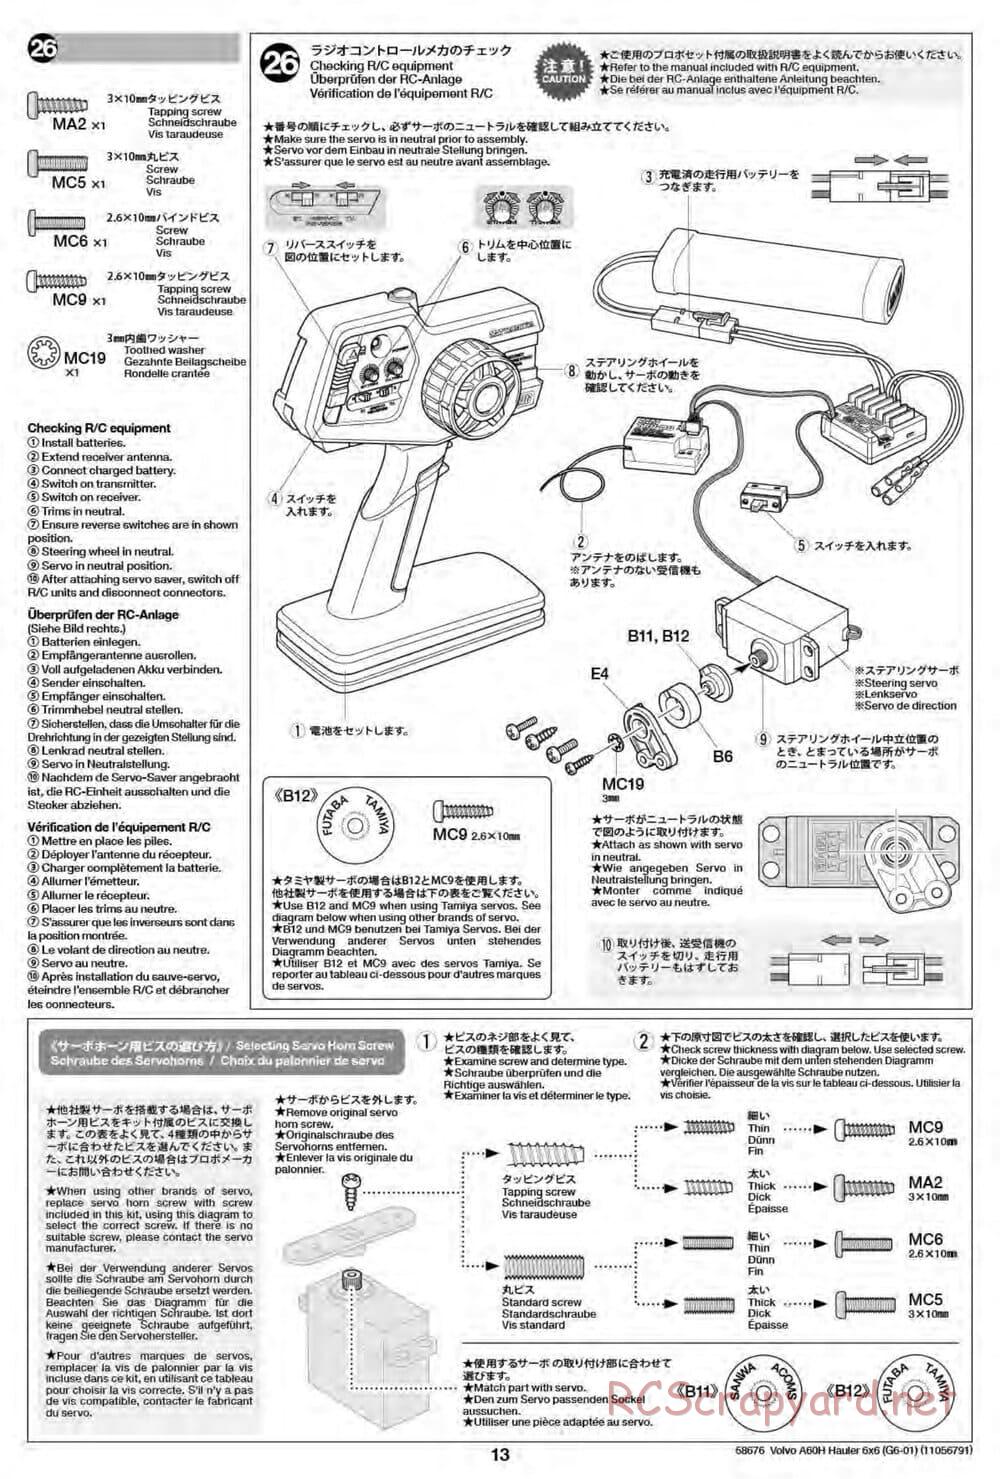 Tamiya - Volvo A60H Dump Truck 6x6 - G6-01 Chassis - Manual - Page 12